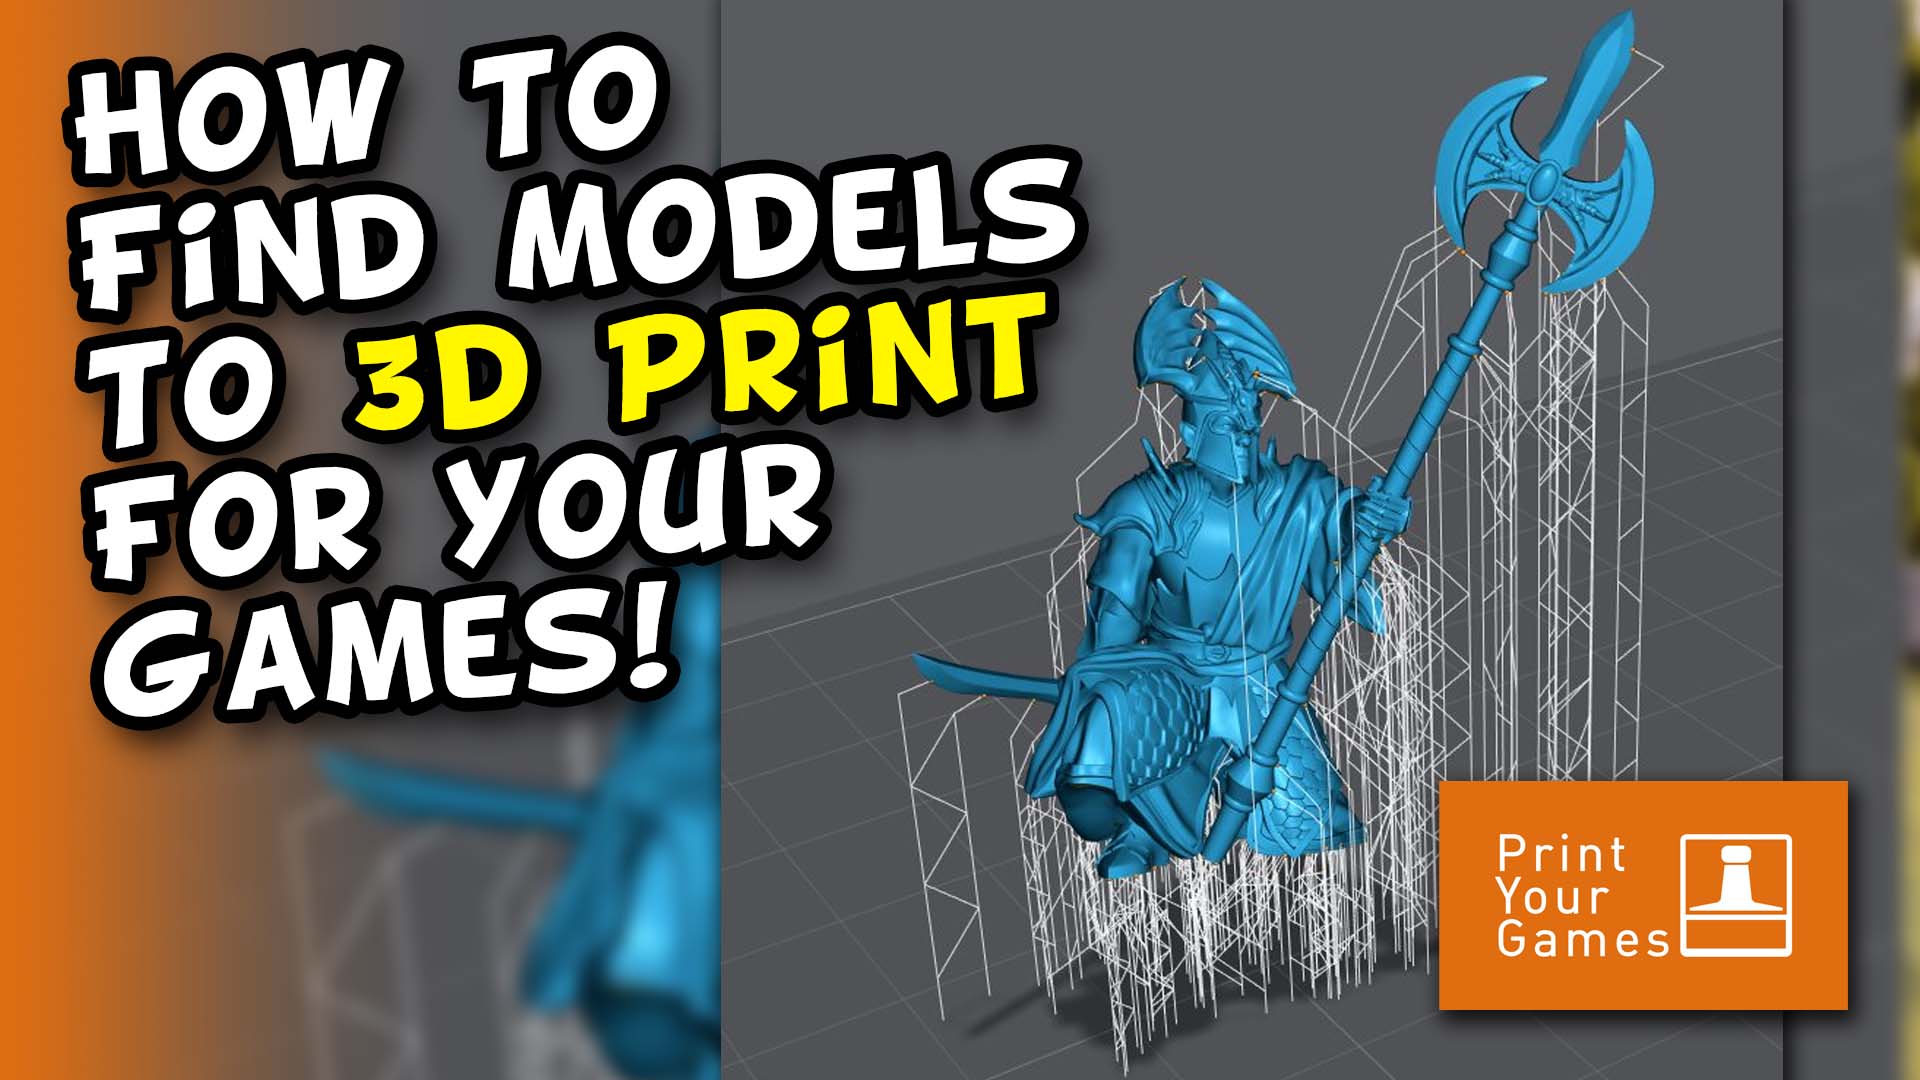 How to Find Models to 3d Print for Your Games!